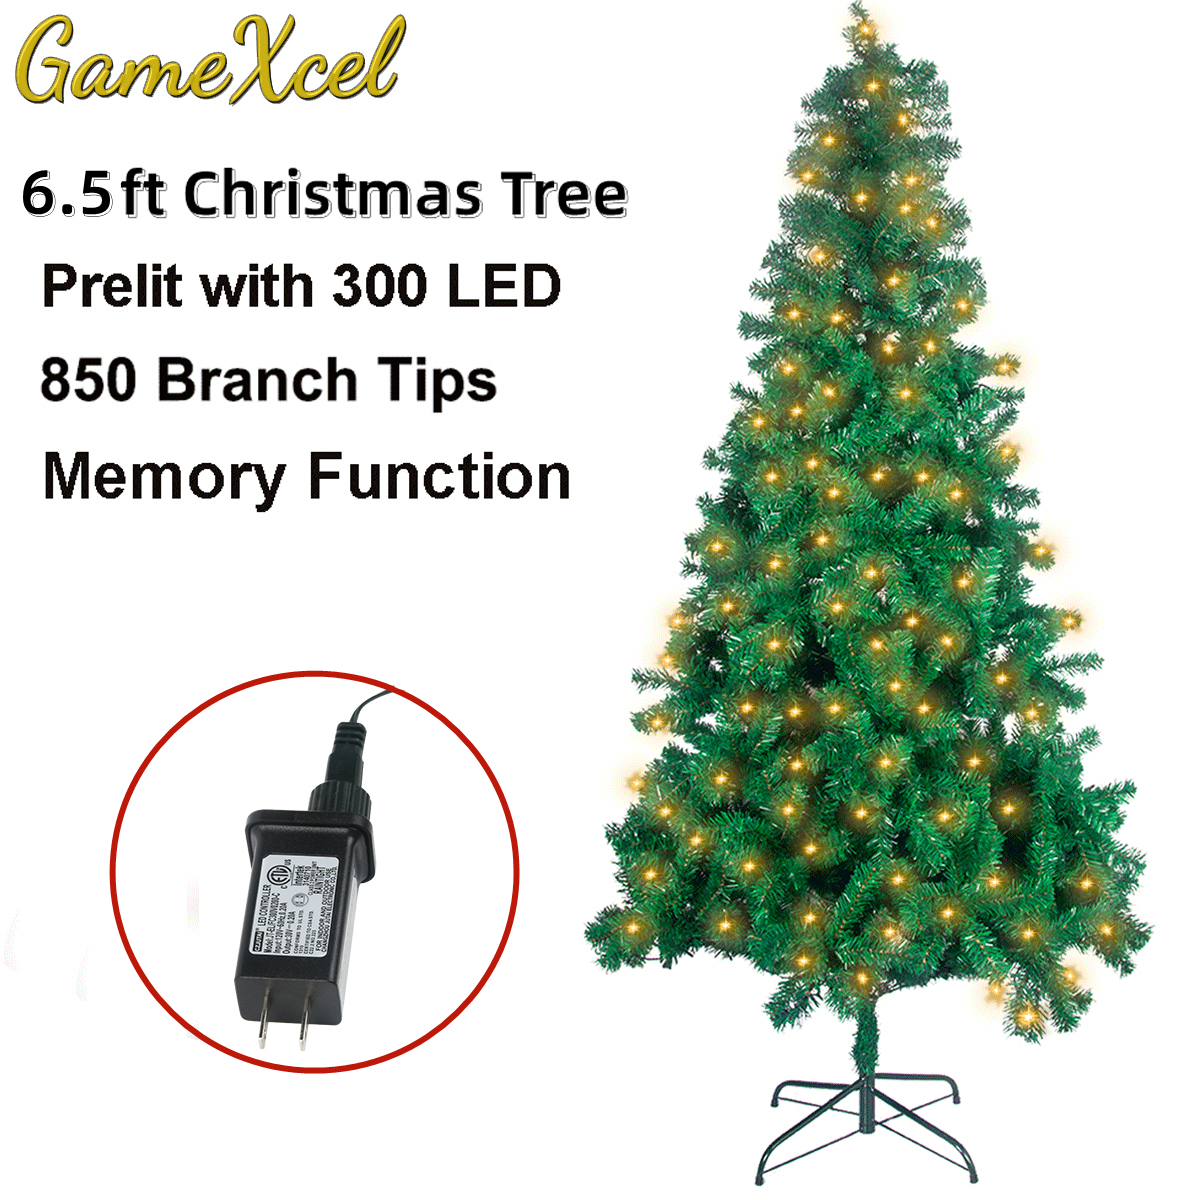 6.5Pre-lit Christmas Trees Xmas Detachable Tree with 850 Unique Branch Tips  Decoration Artificial Christmas Tree with UL Certified DIY 300 LED Lights  Lighting Modes